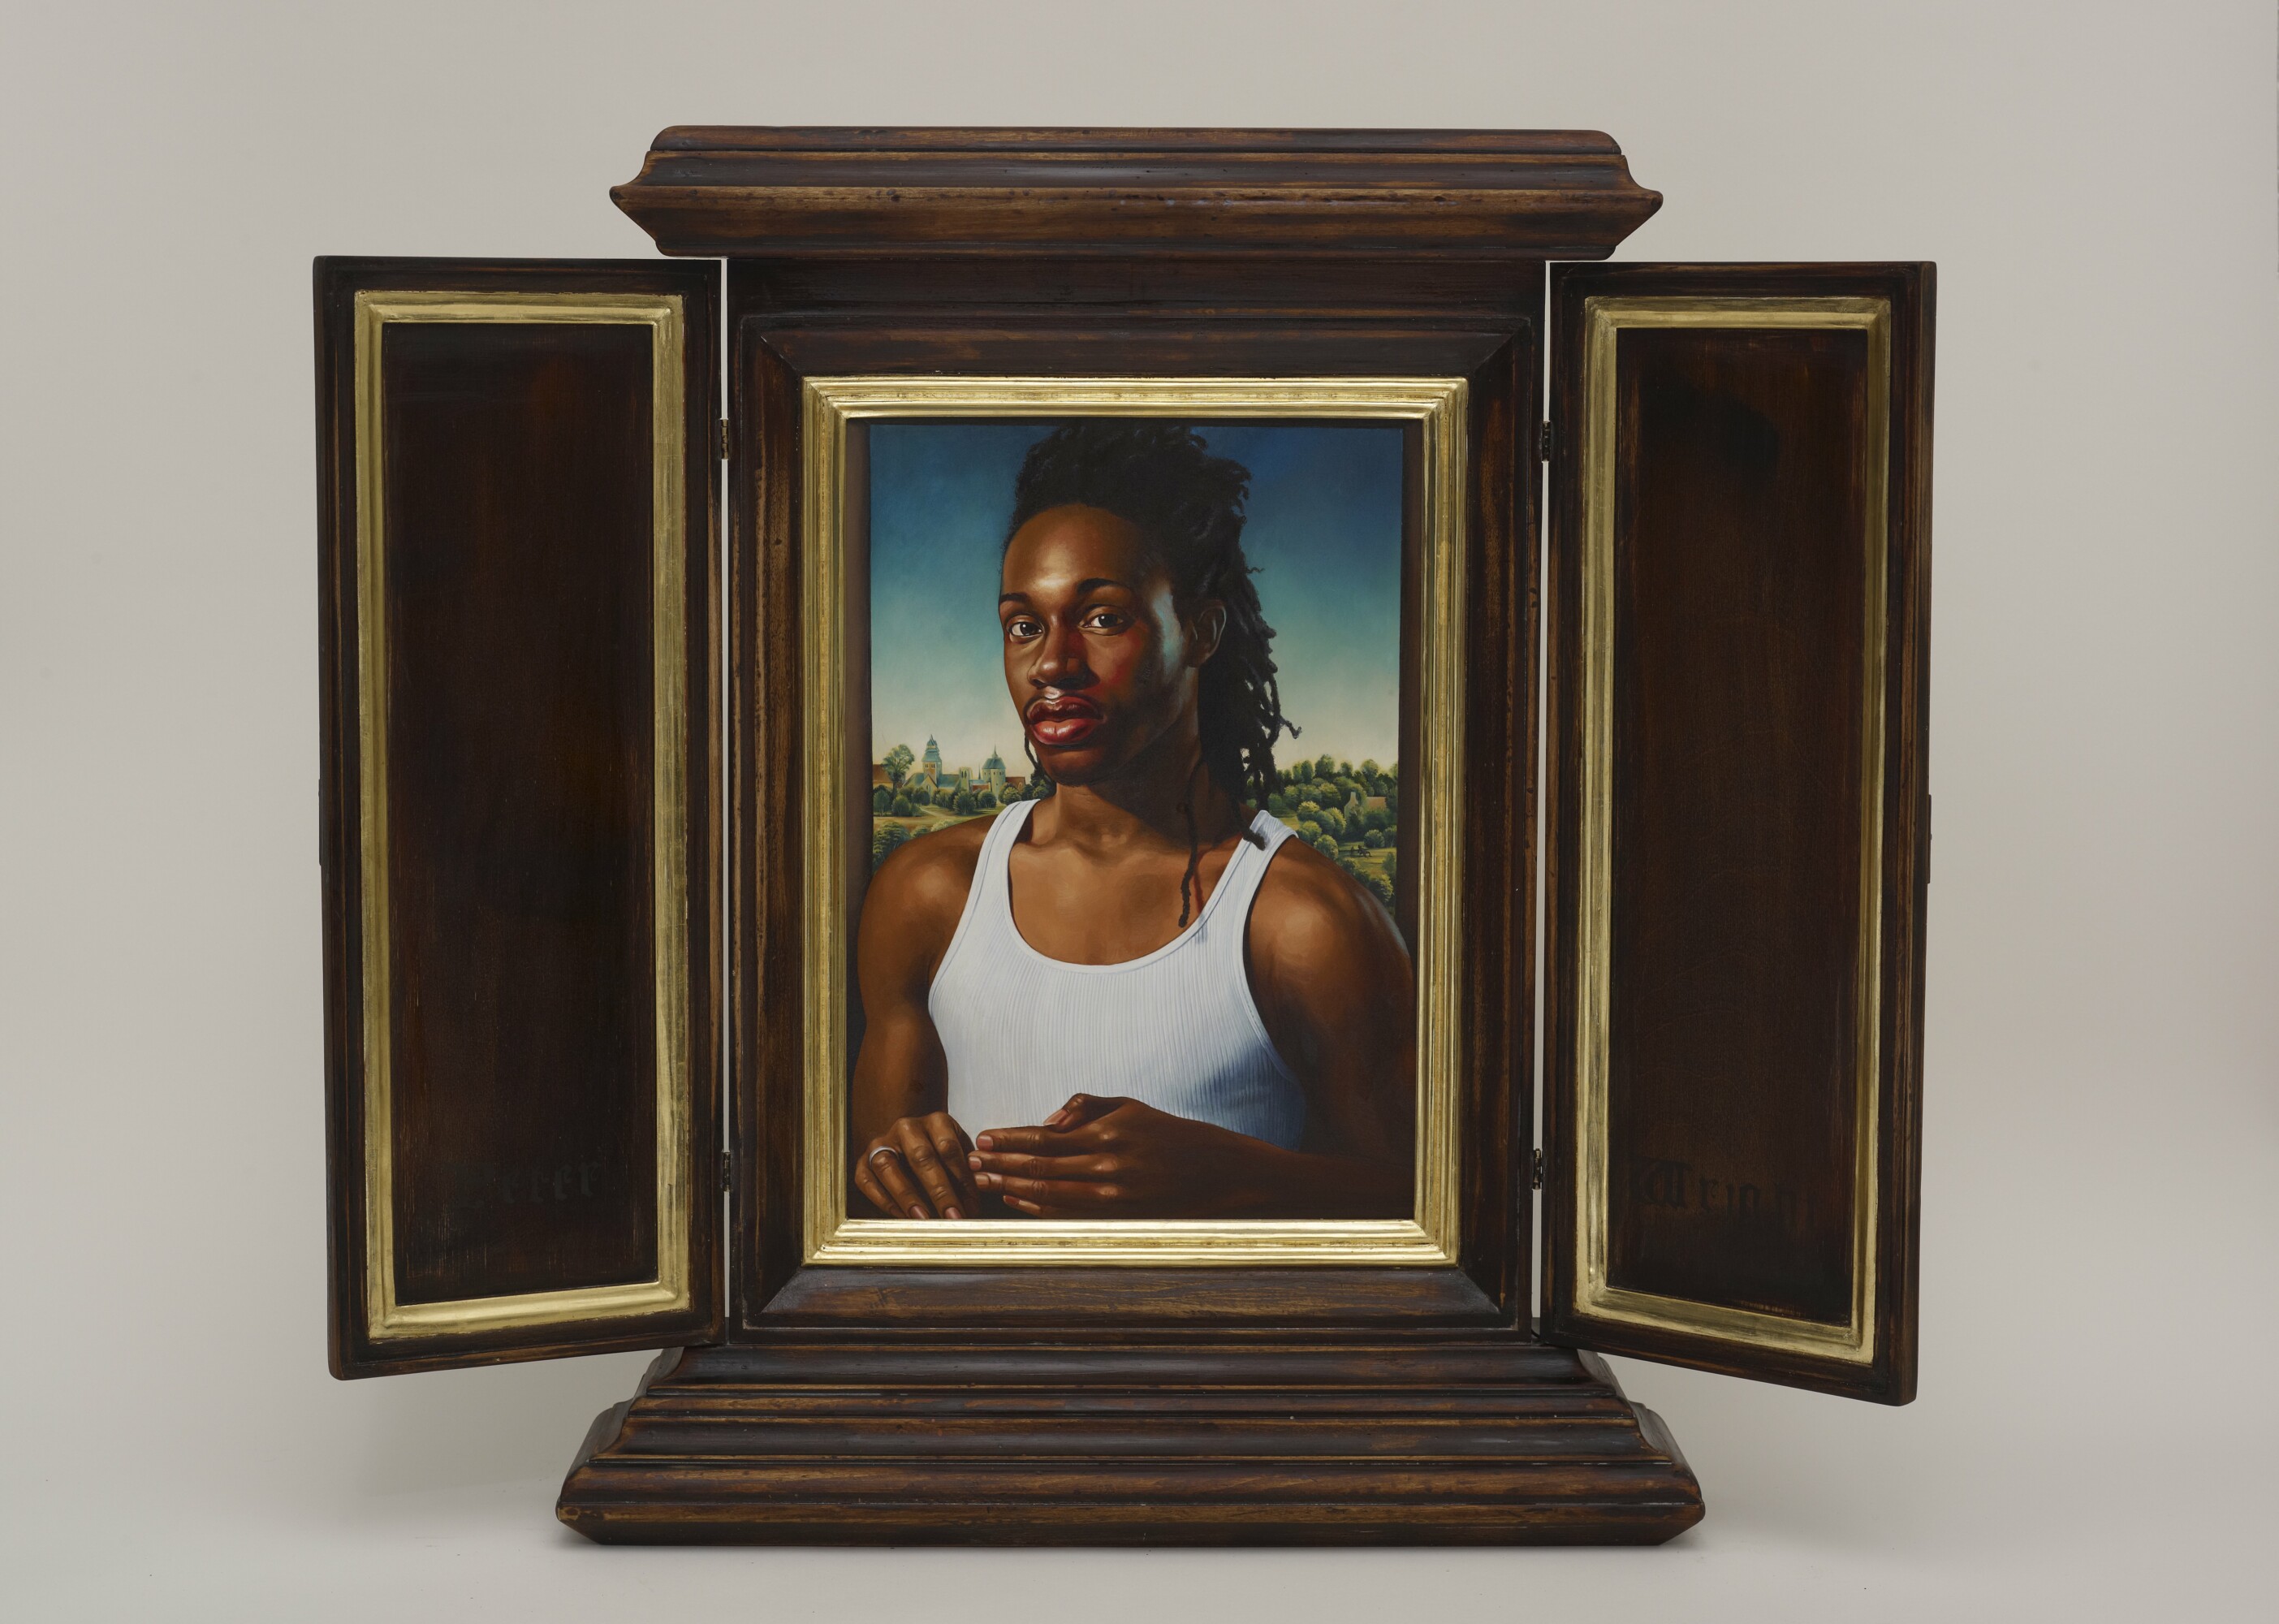 kehindewiley_a new republic_After Memling’s Portrait of a Man in a Red Hat